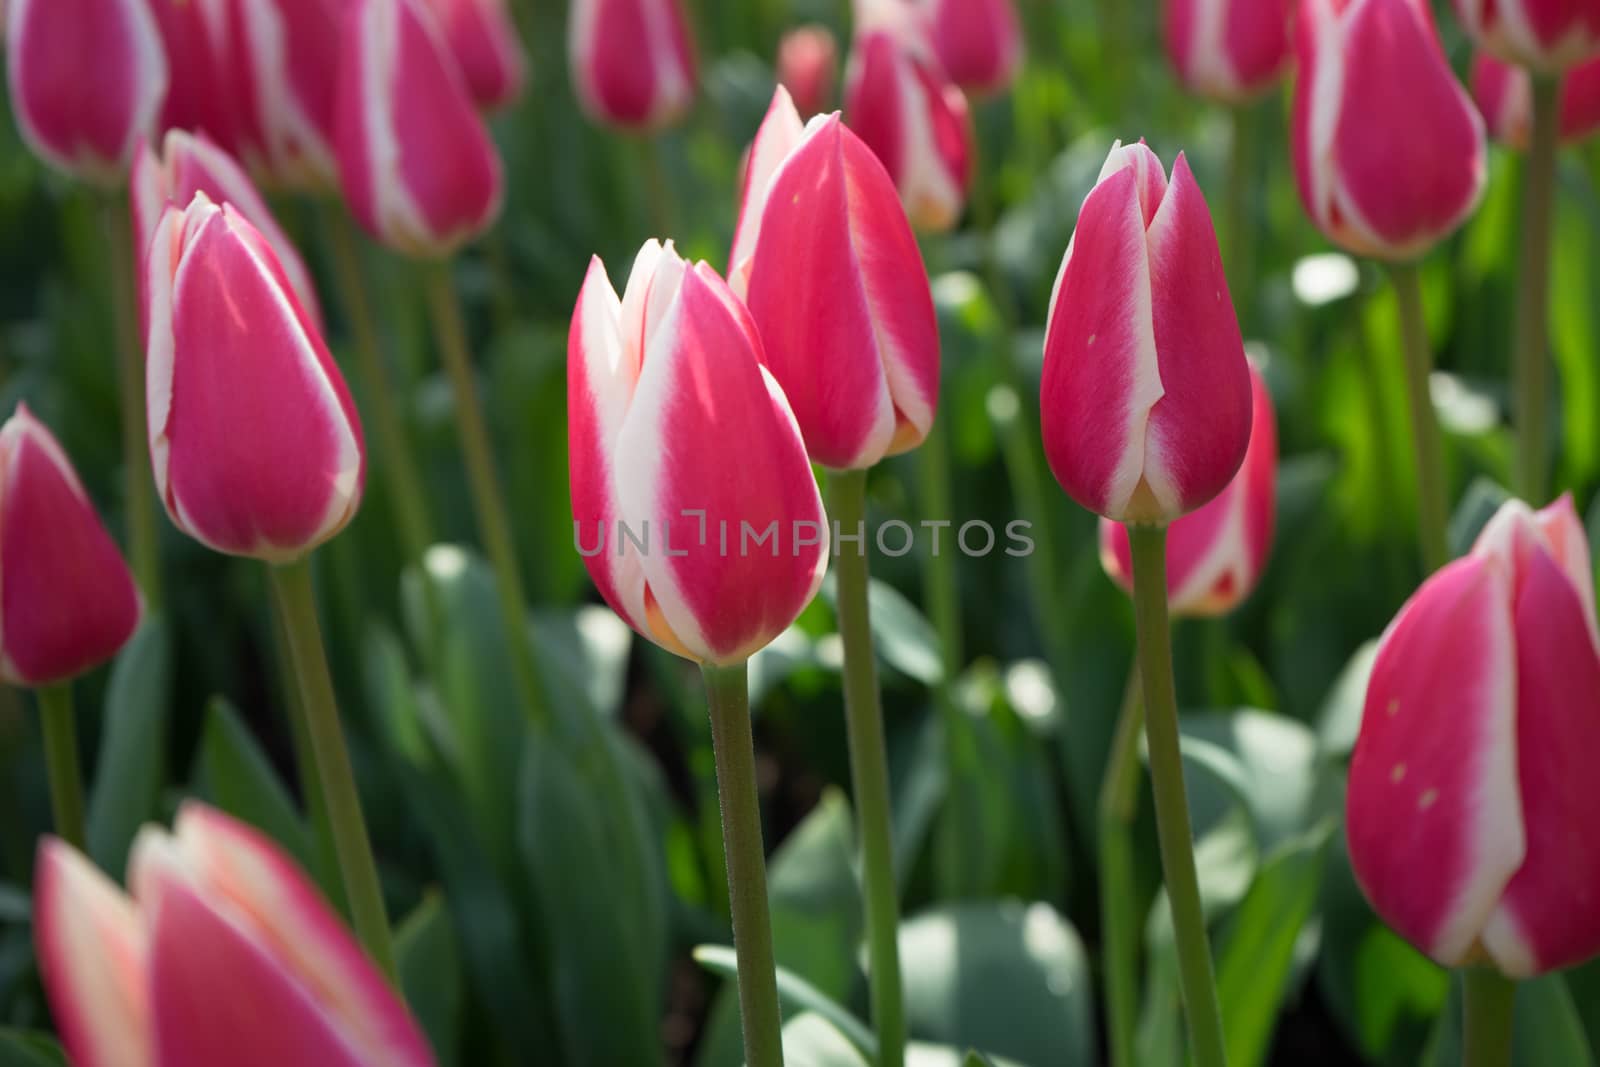 Red and white tulips in a garden in Lisse, Netherlands, Europe on a bright summer day